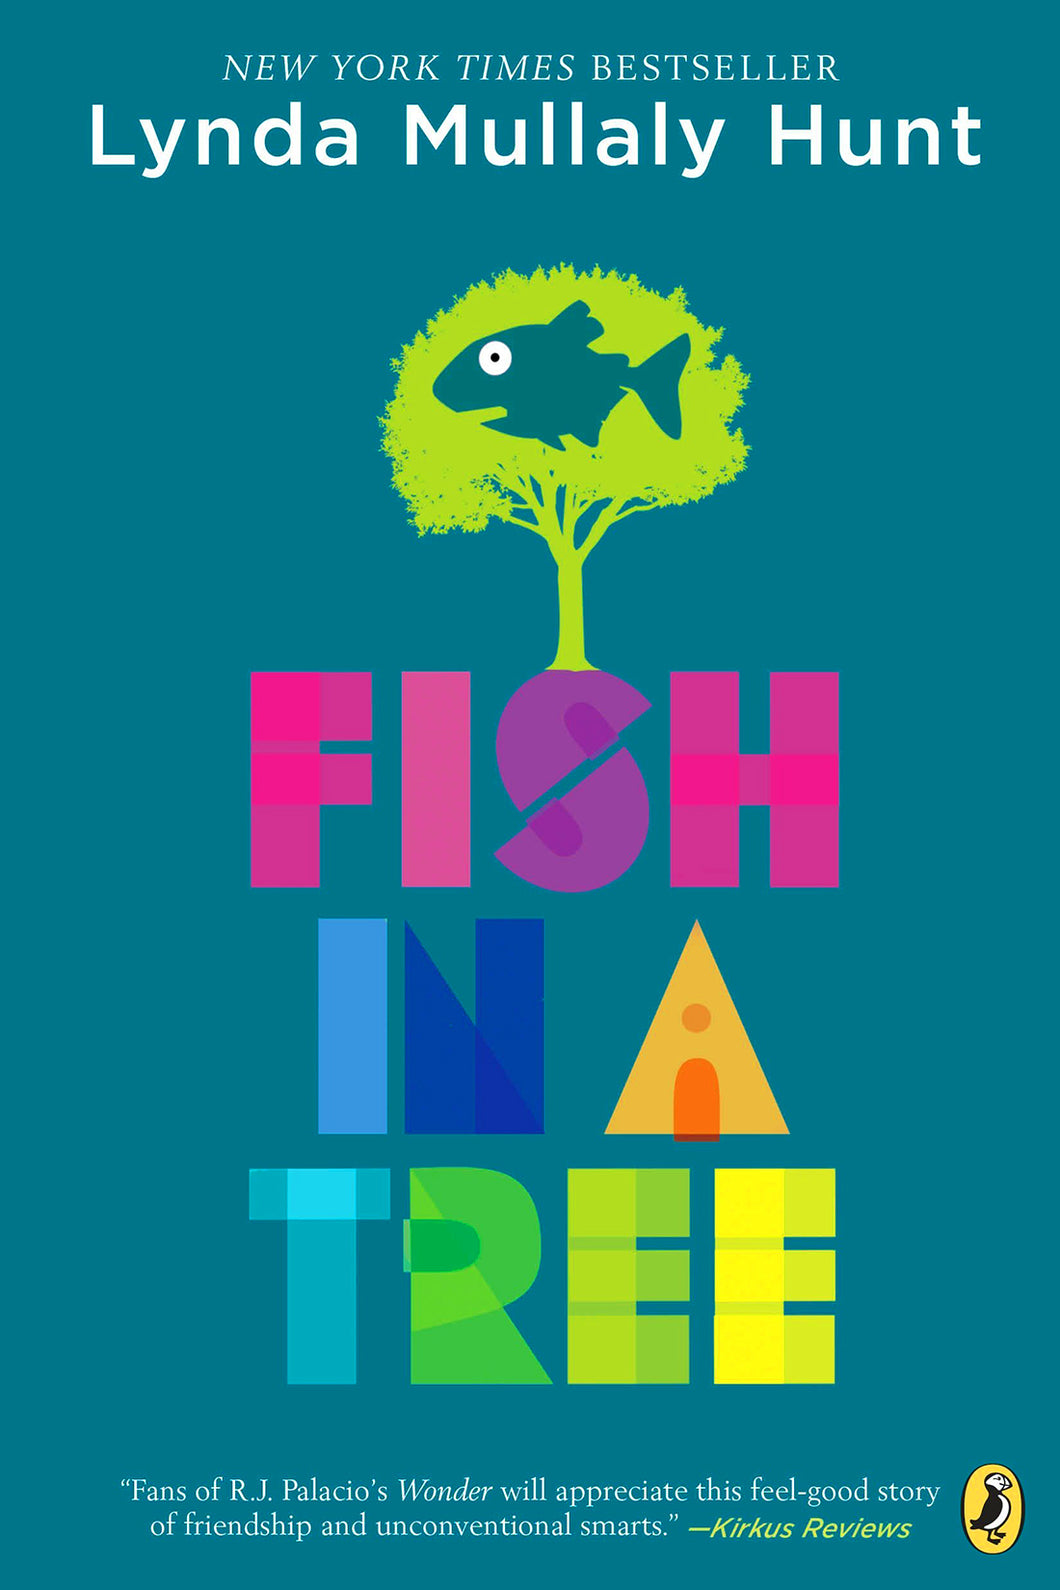 Fish in a Tree by Lynda Mullaly Hunt / Hardcover or Paperback - NEW BOOK (English or Spanish)